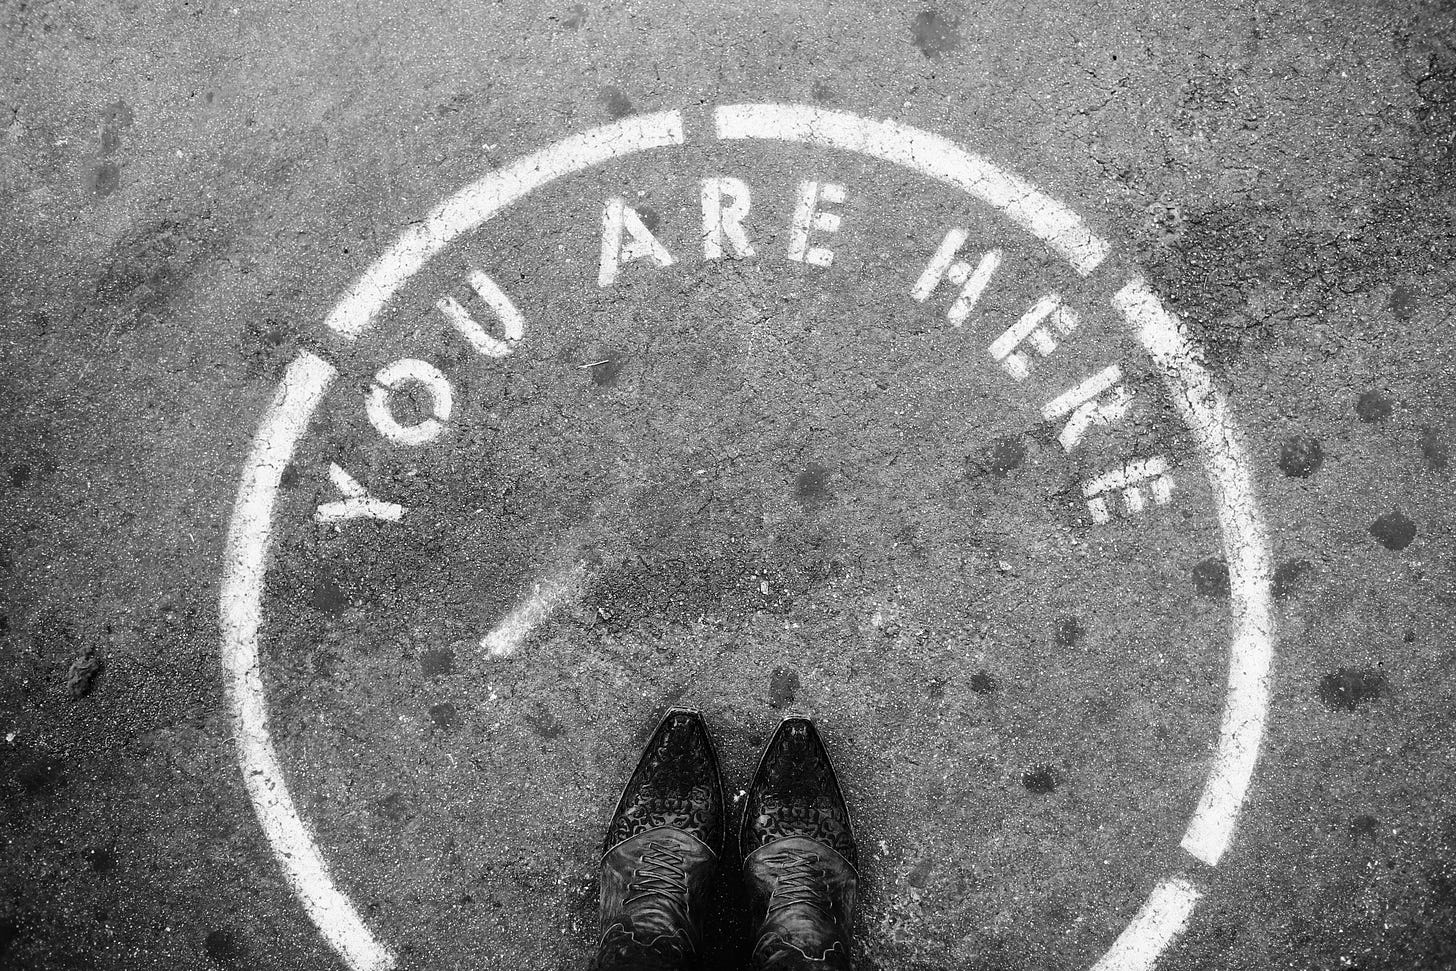 Free upsplash image of unseen person standing on sidewalk where You are Here is written.